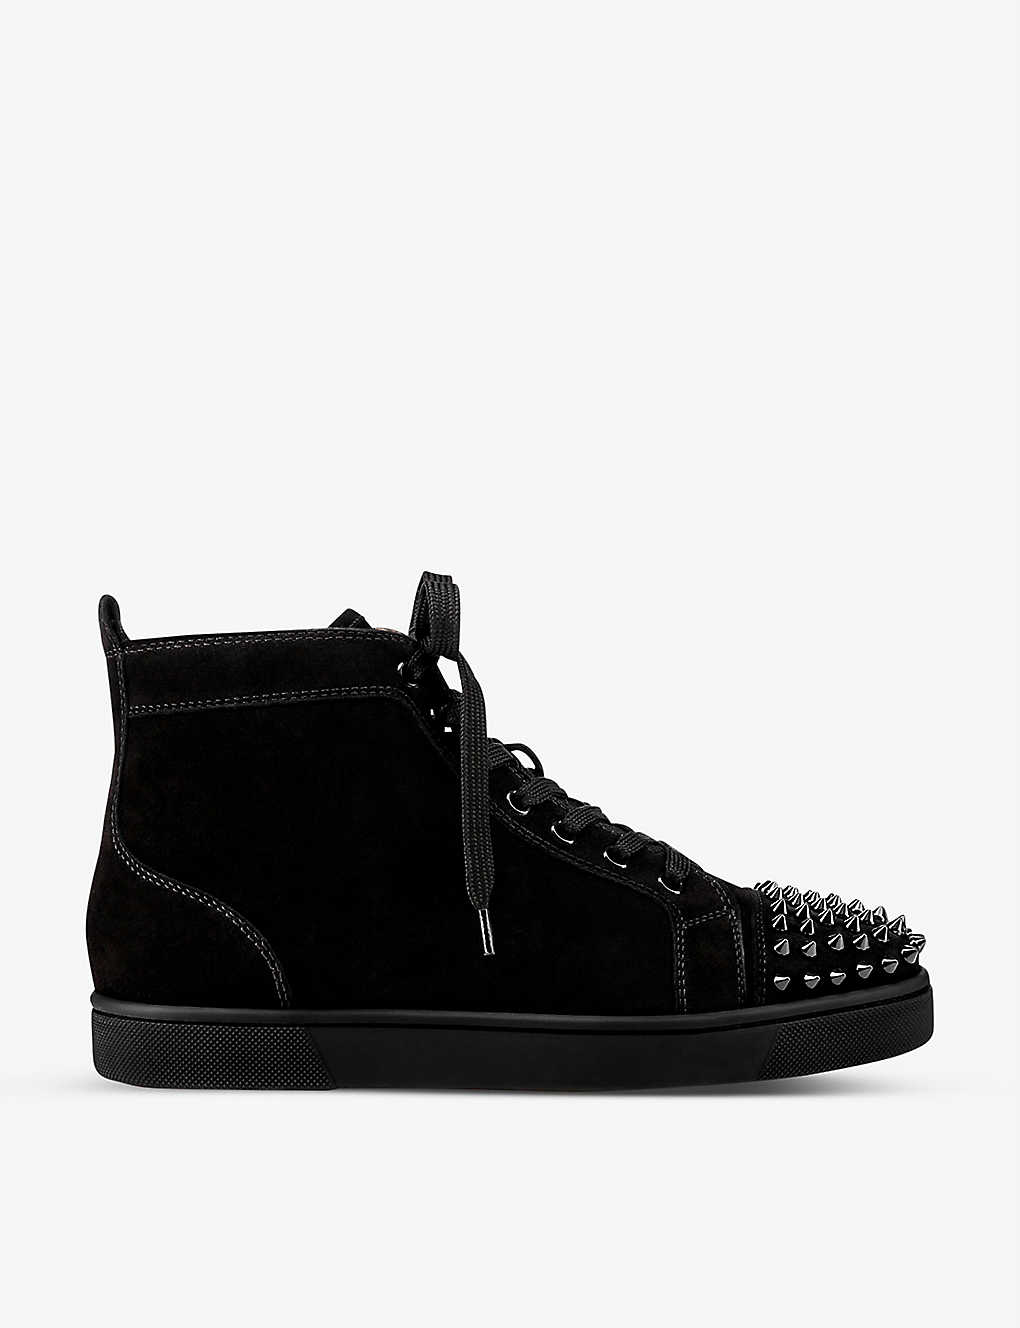 Christian Louboutin Mens Black Louis Spikes Suede High-top Trainers